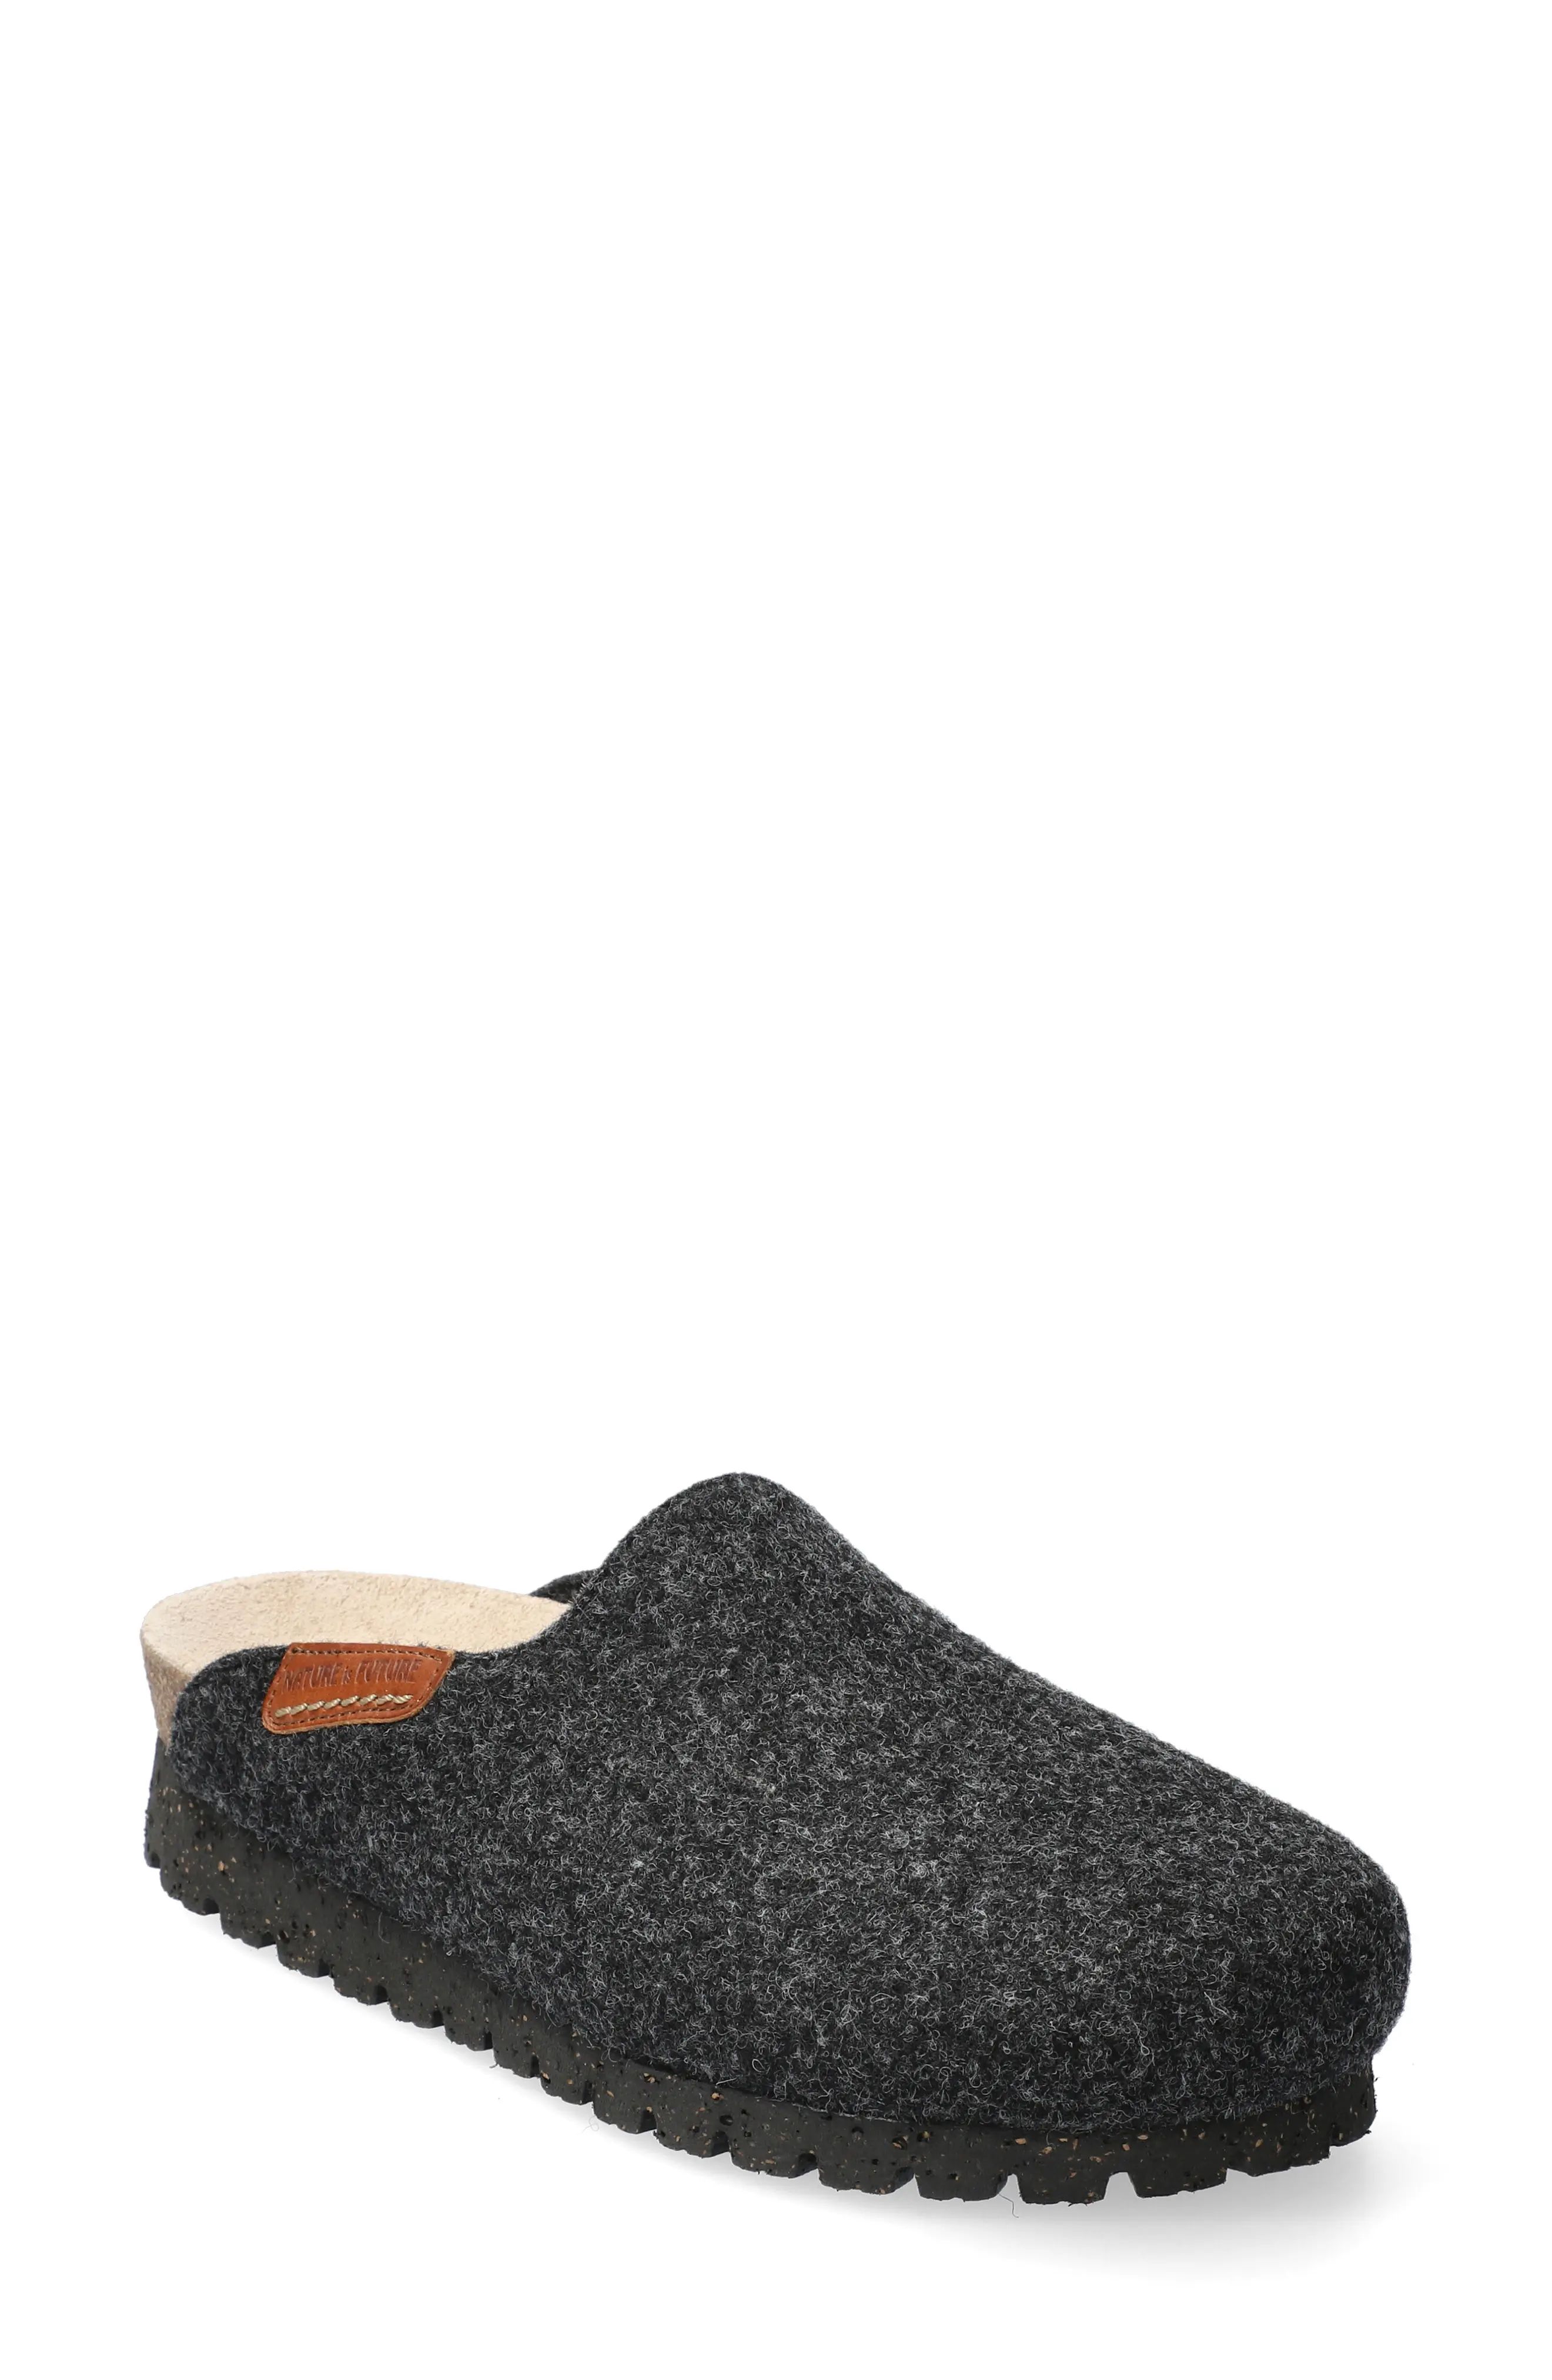 Mephisto Thea Boiled Wool Clog in Carbon Sweety Leather at Nordstrom, Size 6 | Nordstrom